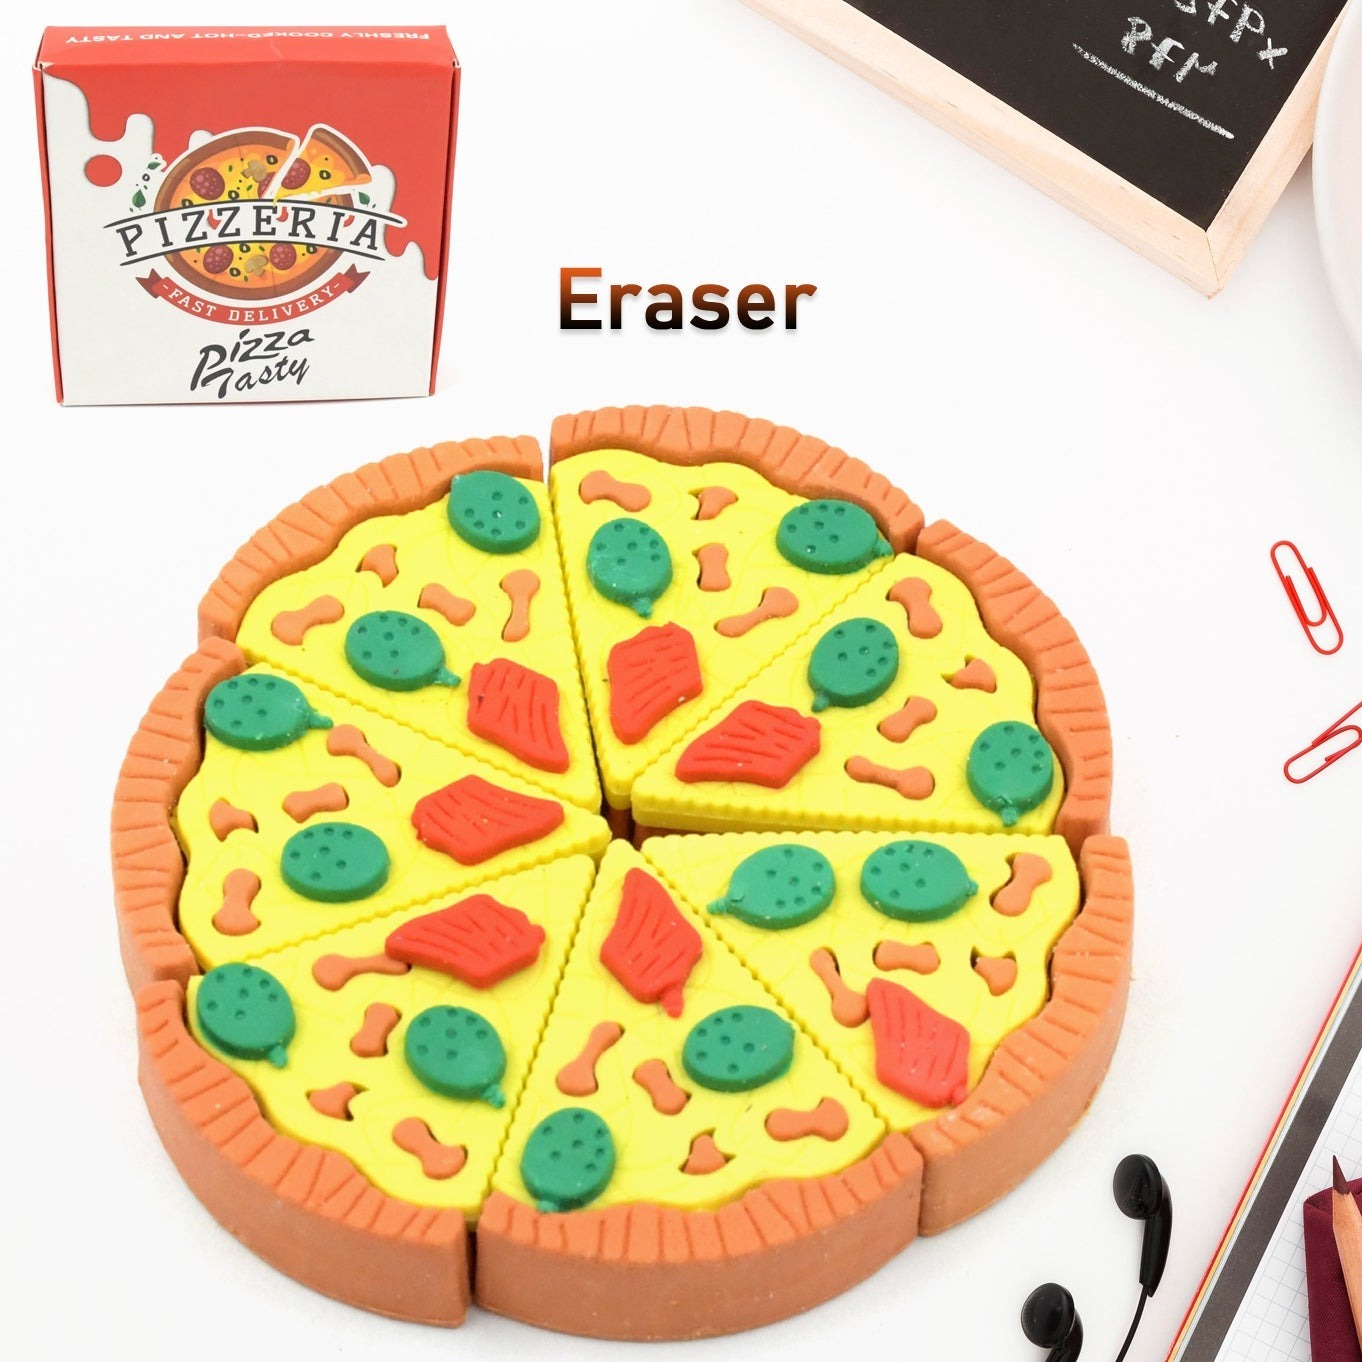 7-Slice Pizza Eraser Set - Ideal for Kids, Adults, and Fast Food Enthusiasts. Perfect for Stationery Kits, Return Gifts, Birthdays, and School Prizes